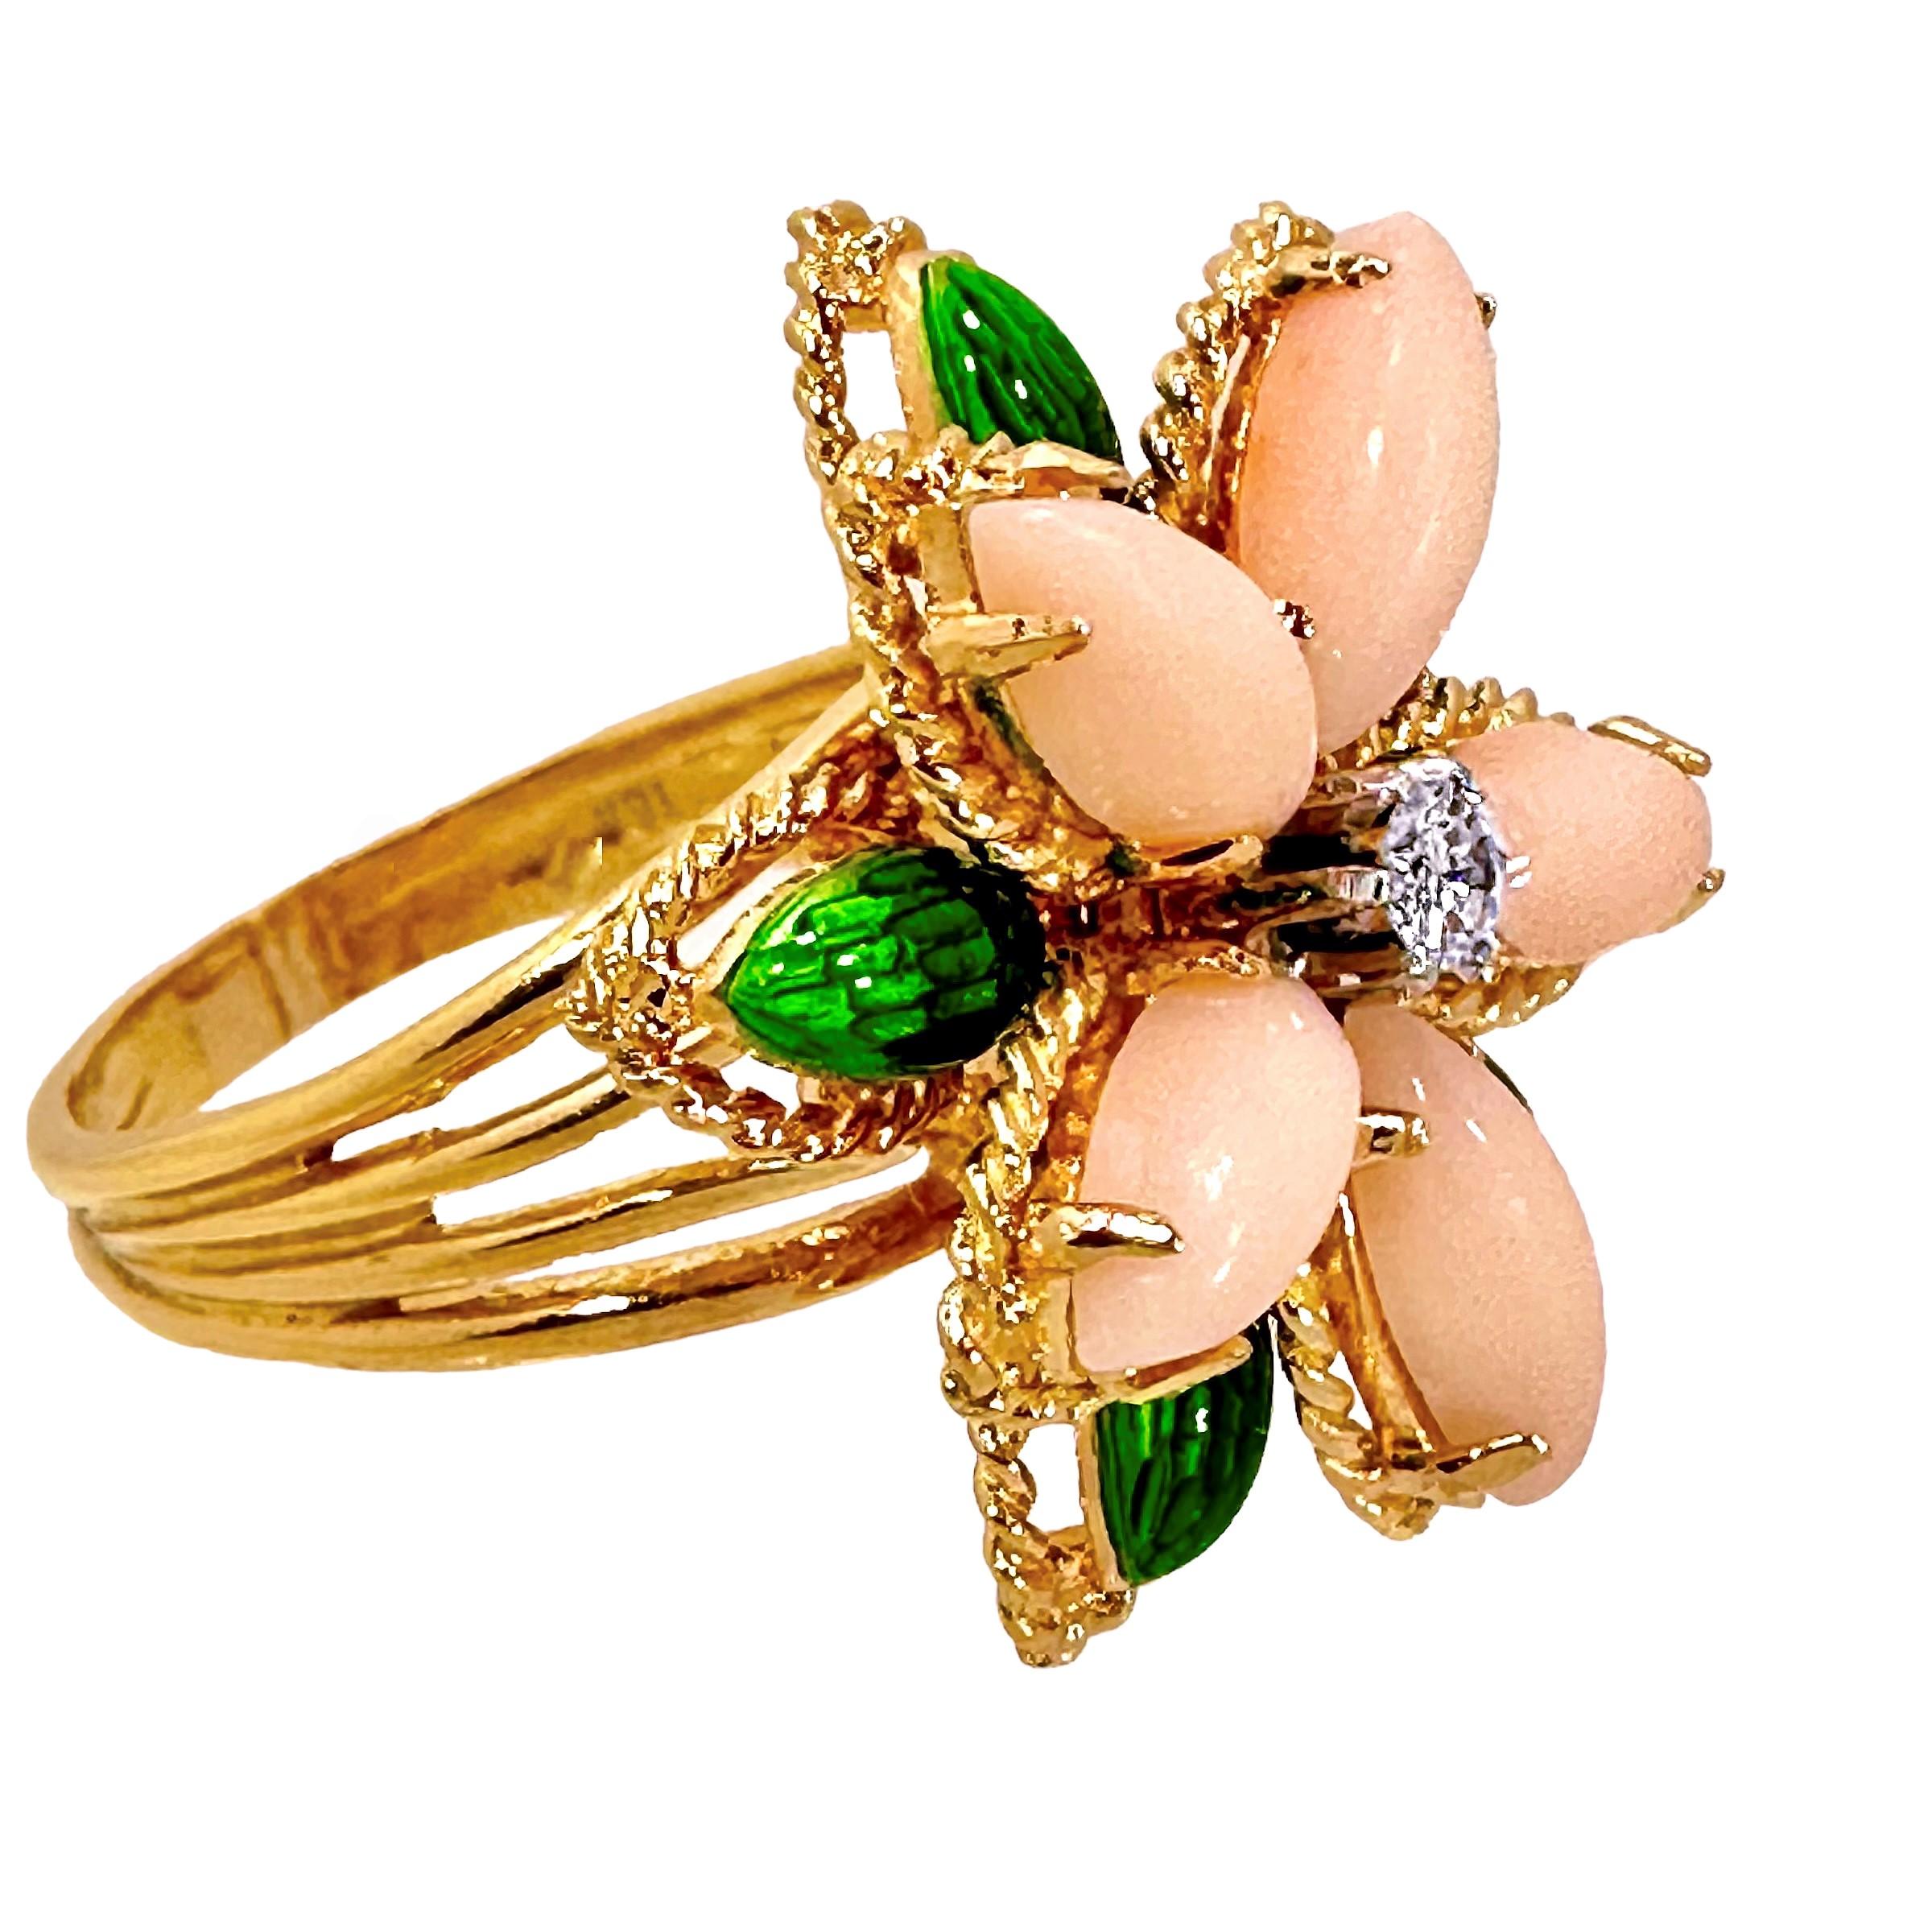 This lovely, Mid-20th Century 18K yellow gold Italian flower motif ring feels beautifully organic. The diamond in the center is surrounded by angel skin coral petals and transparent green enamel leaves. The diamond weighs approximately .17ct of G